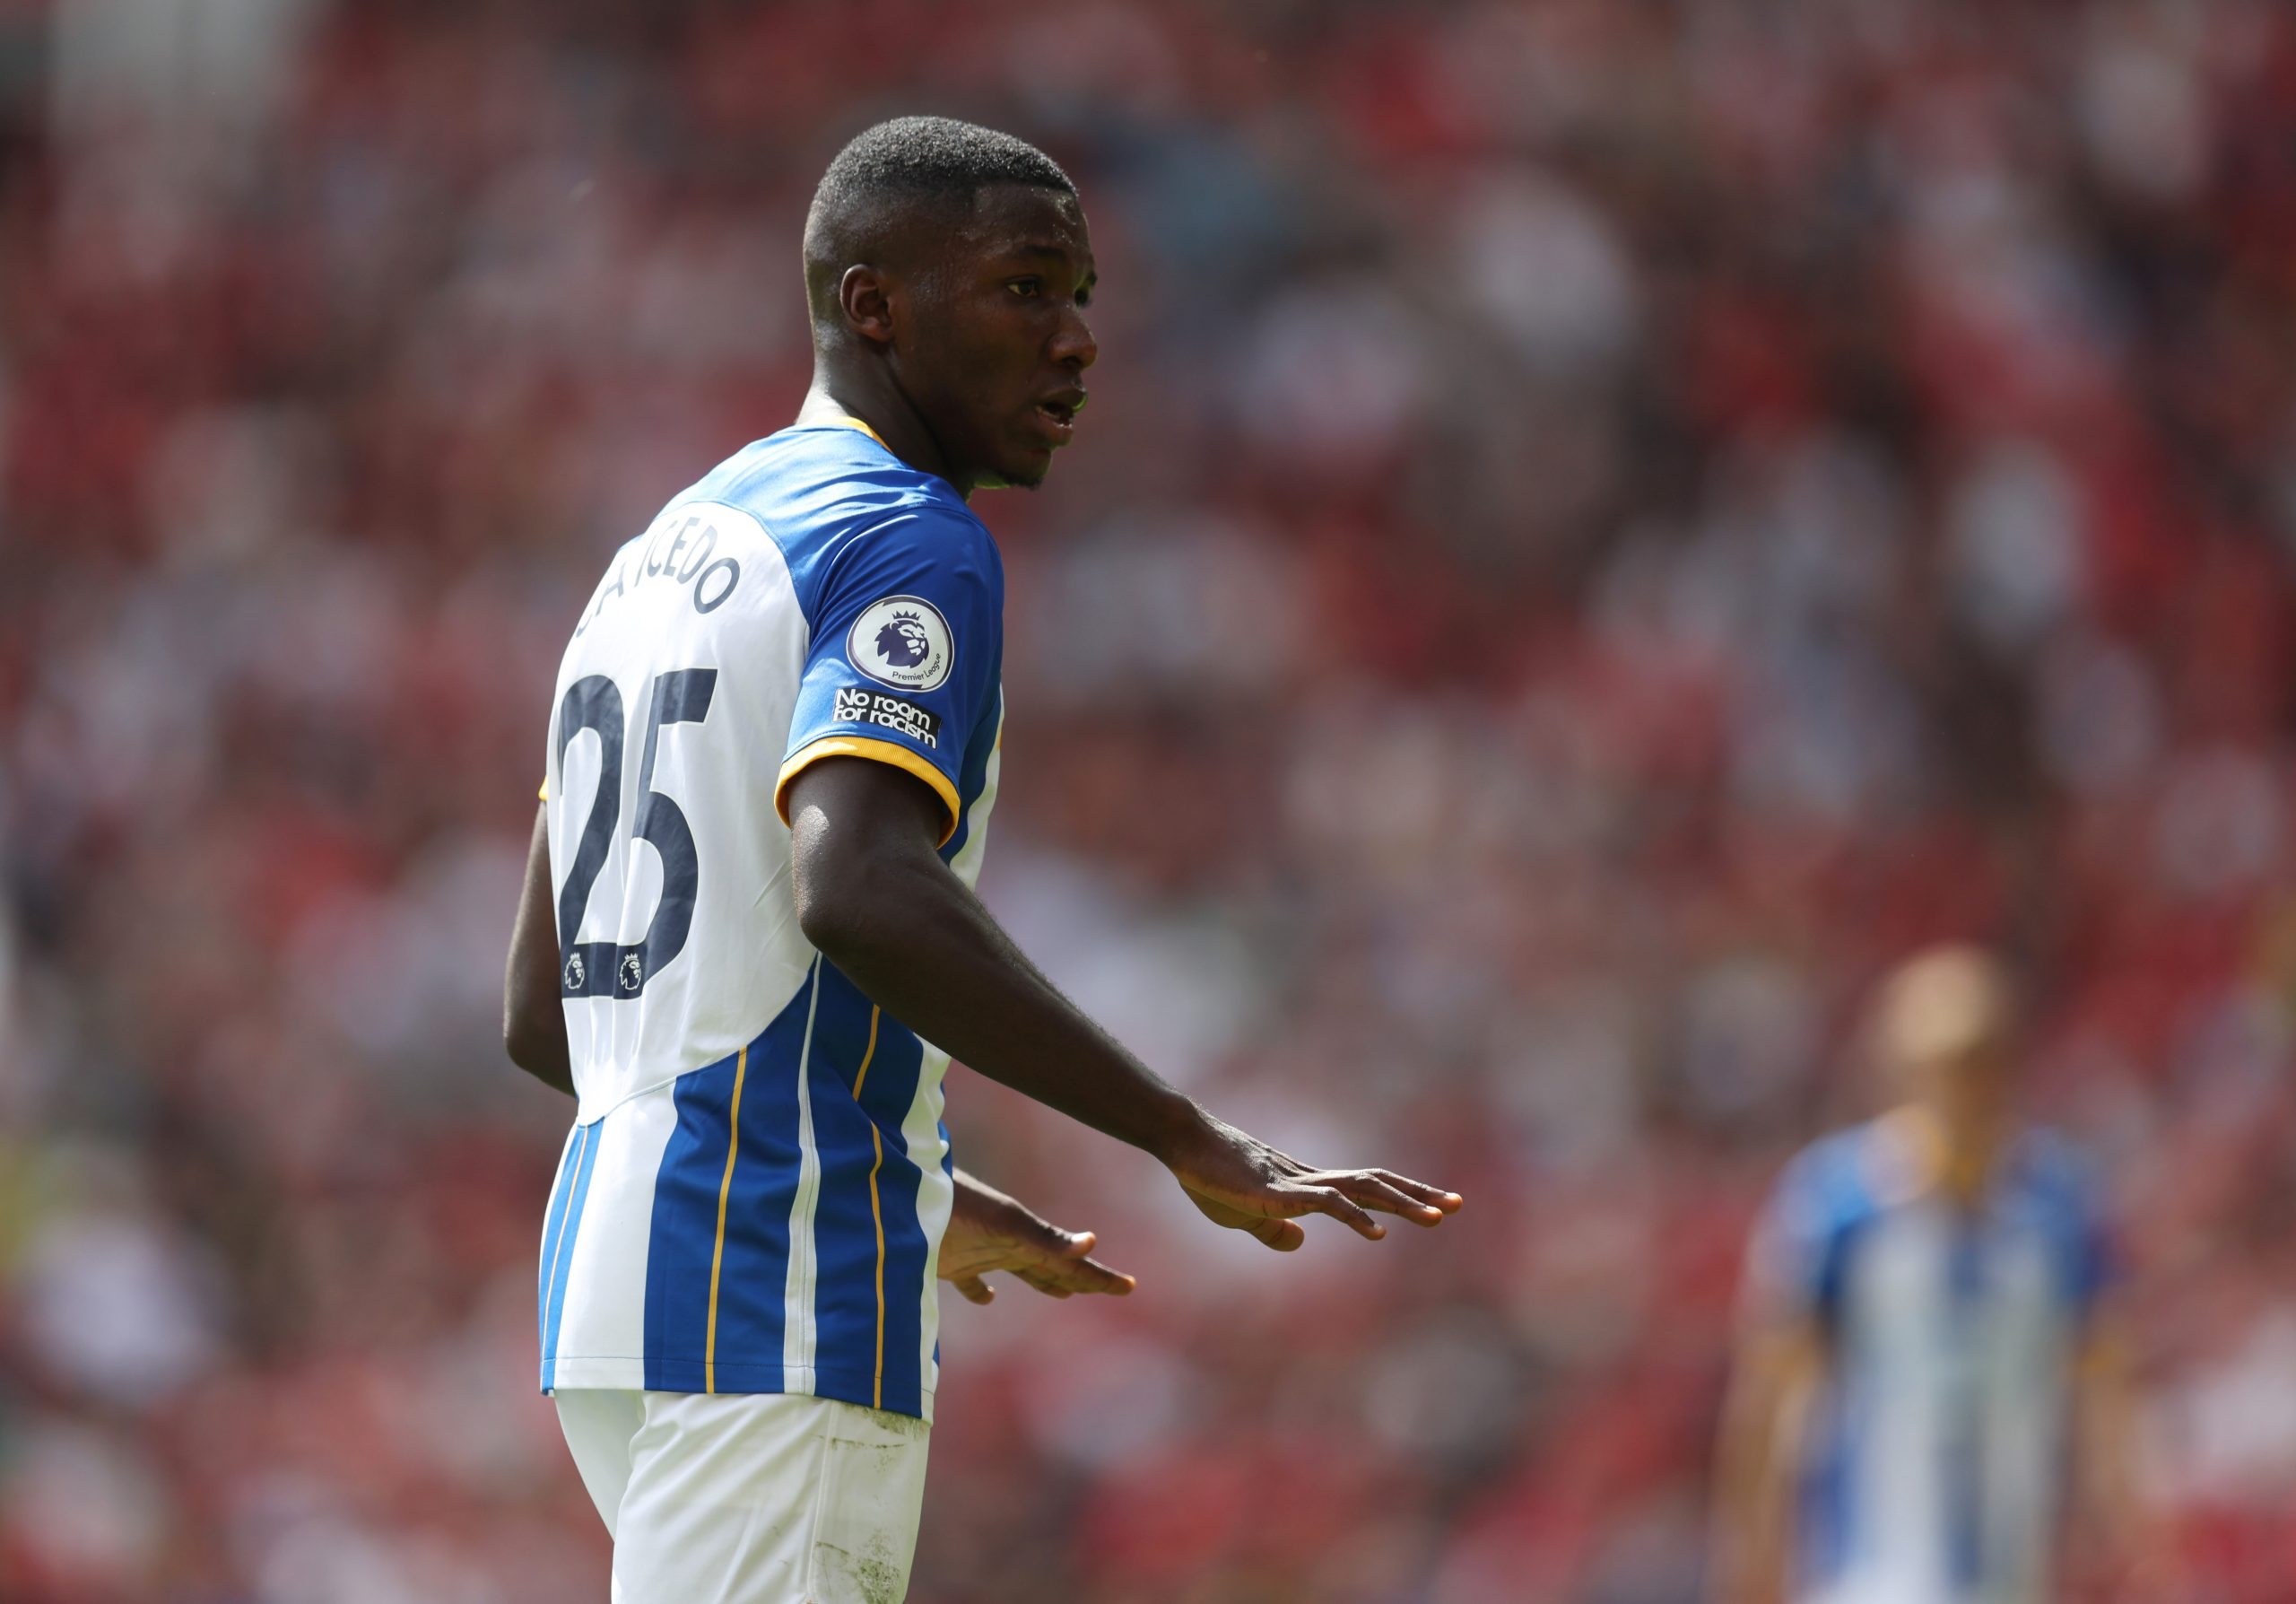 Brighton CEO Paul Barber confirms Chelsea star Moises Caicedo will get his chance to play for top clubs.